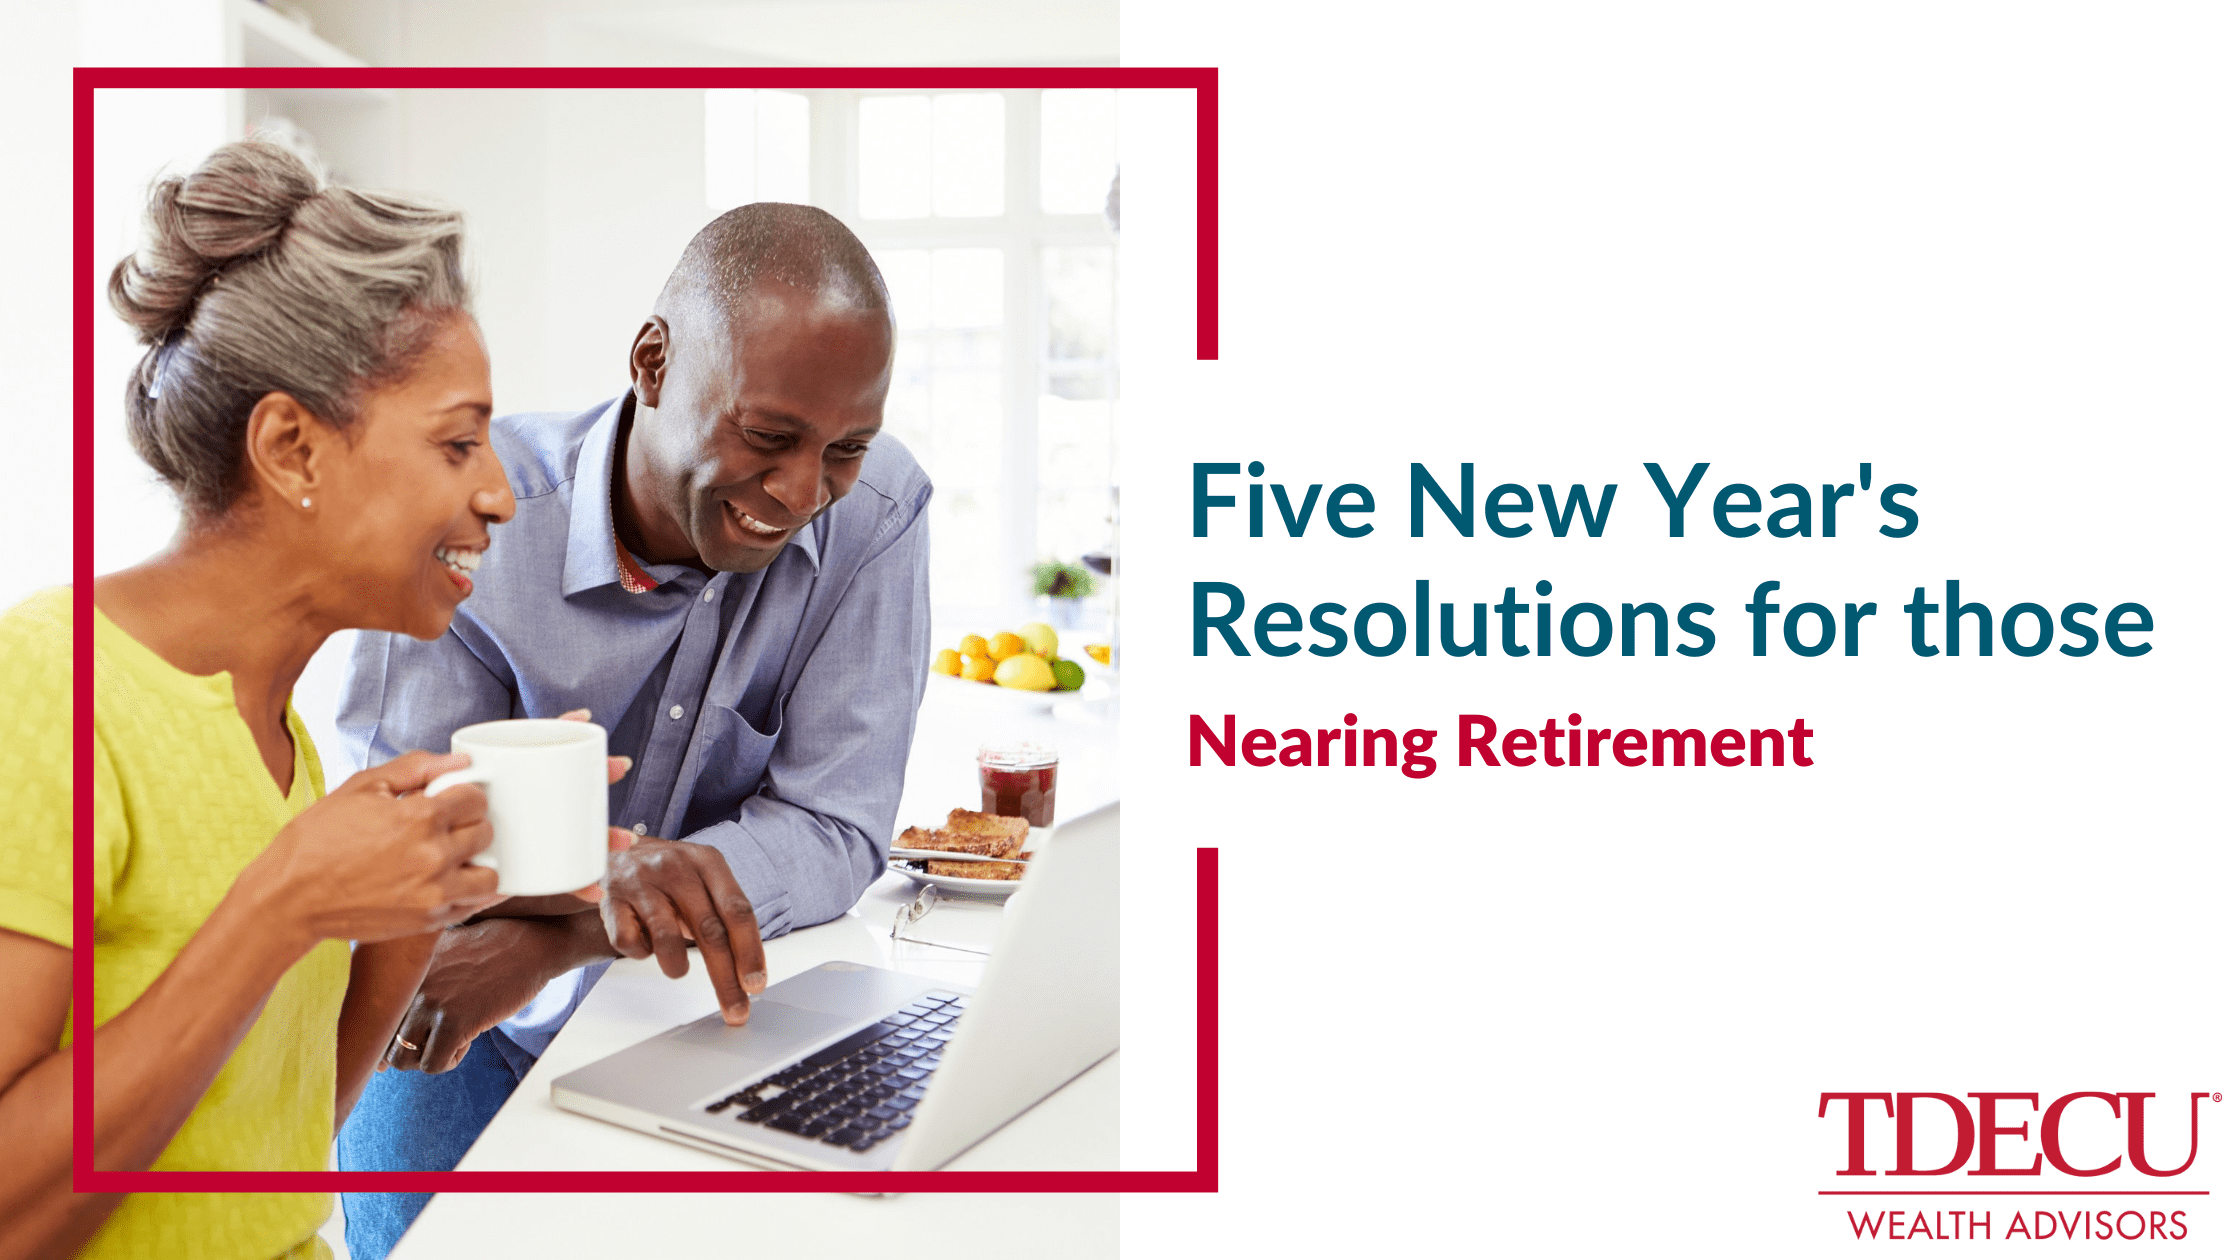 Five New Year's Resolutions for Those Nearing Retirement